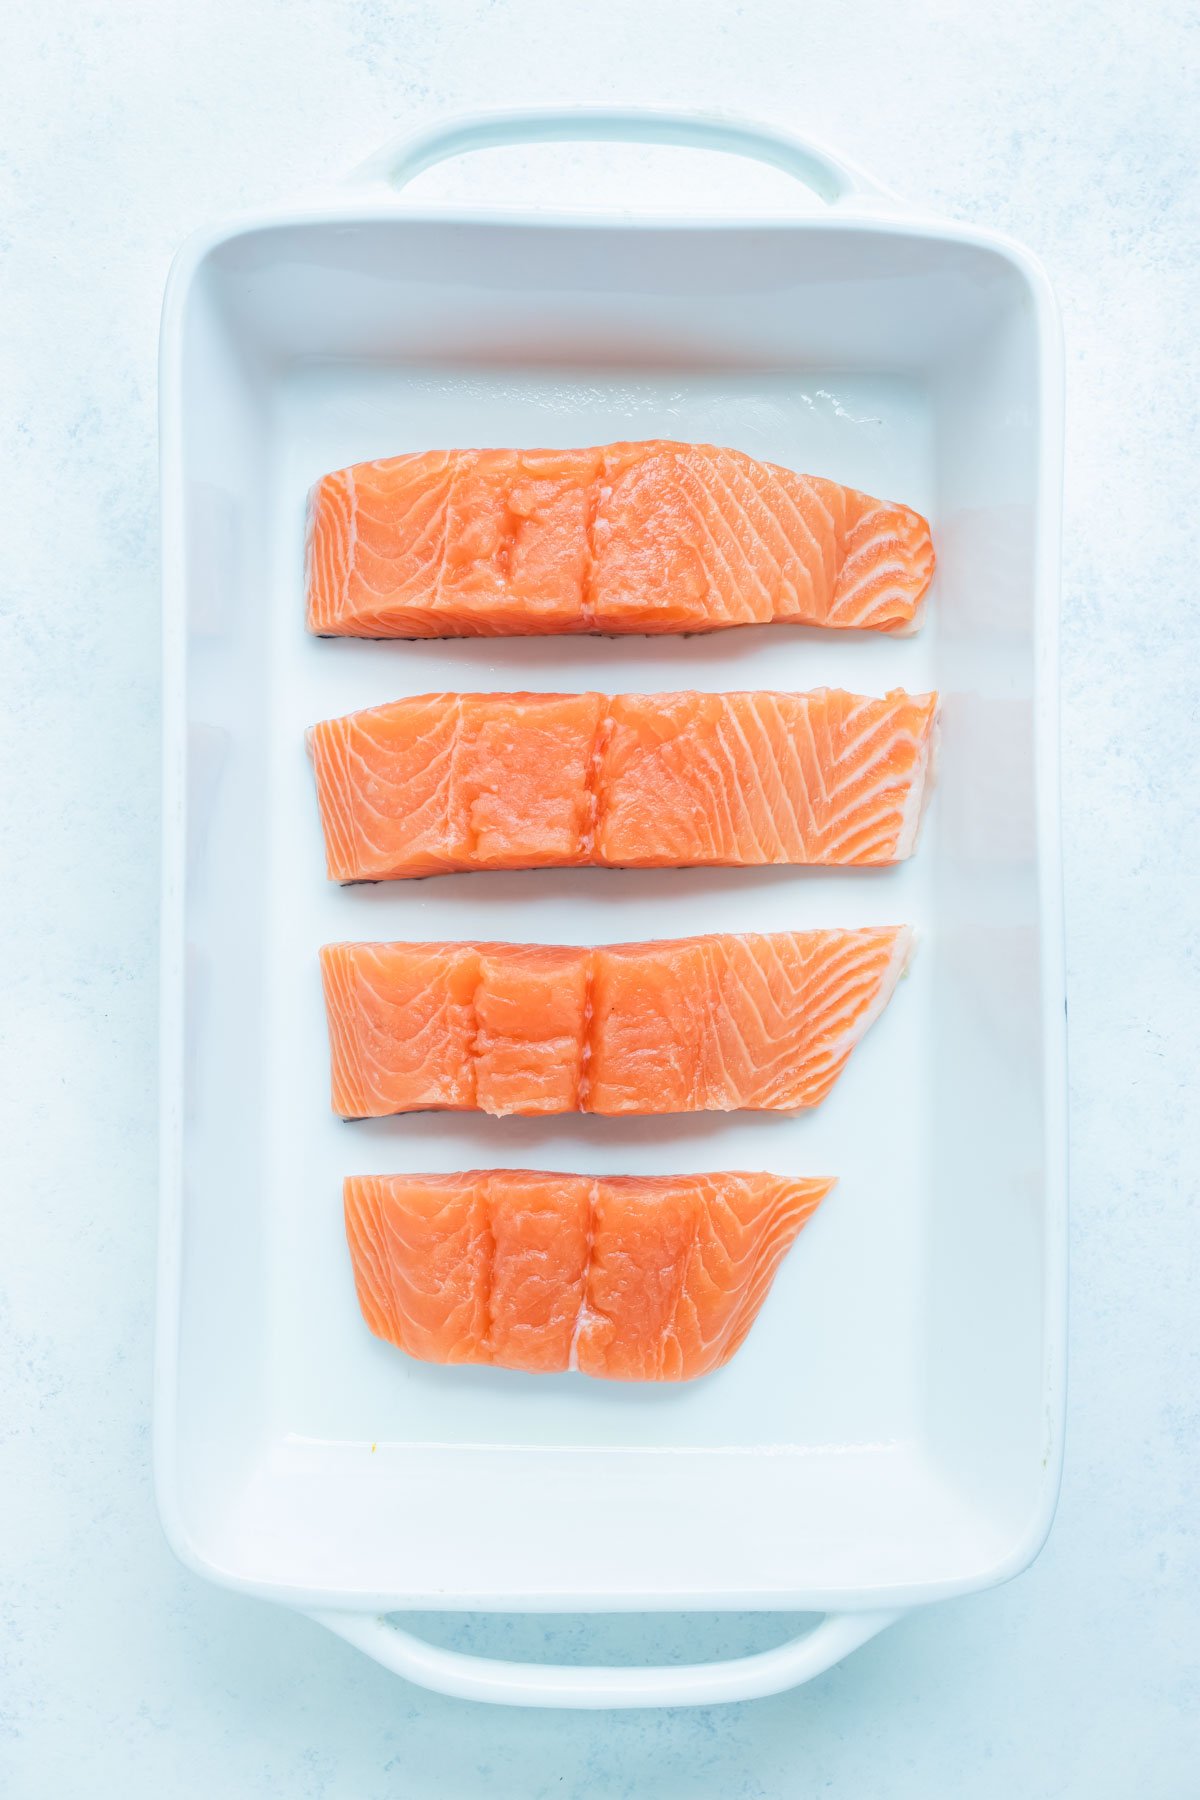 The four pieces of salmon are placed in a baking dish.